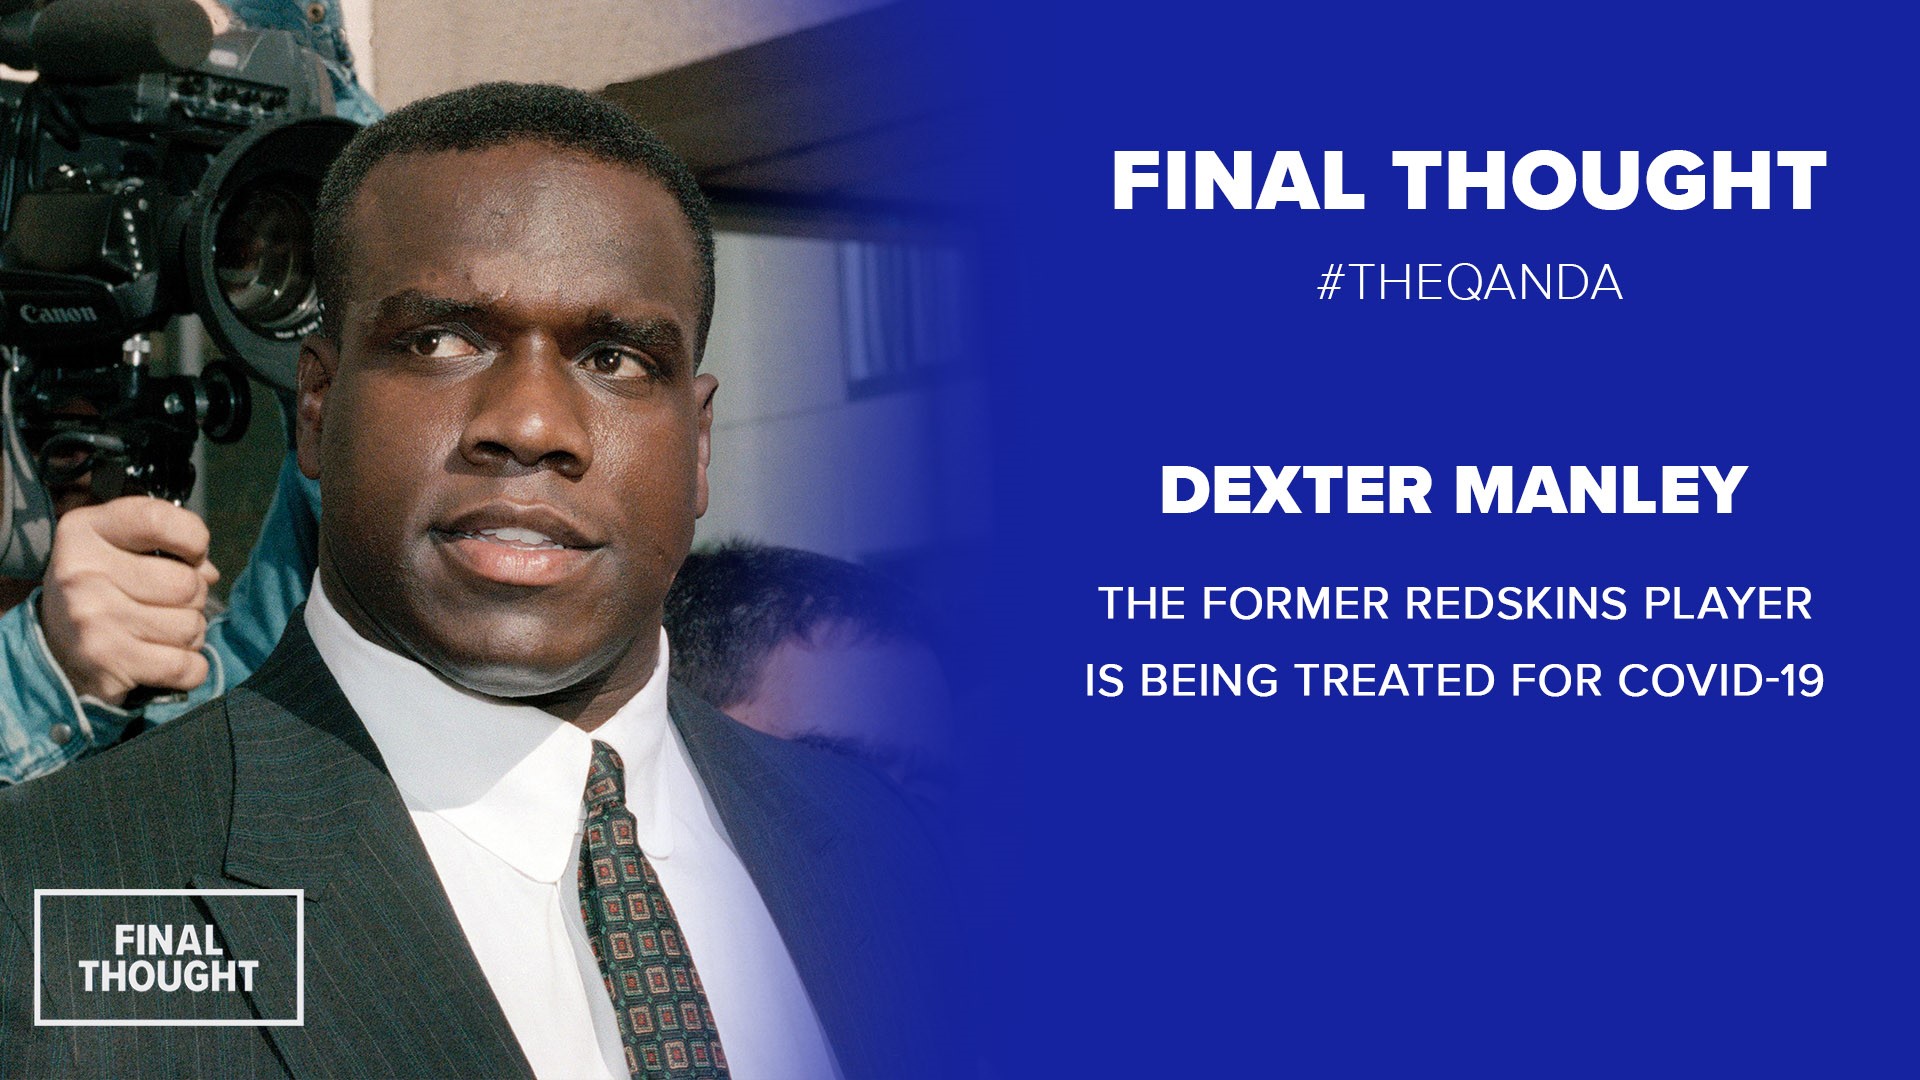 Dexter Manley has been in the hospital since Friday. He's being treated for Covid 19 and is reportedly resting comfortably